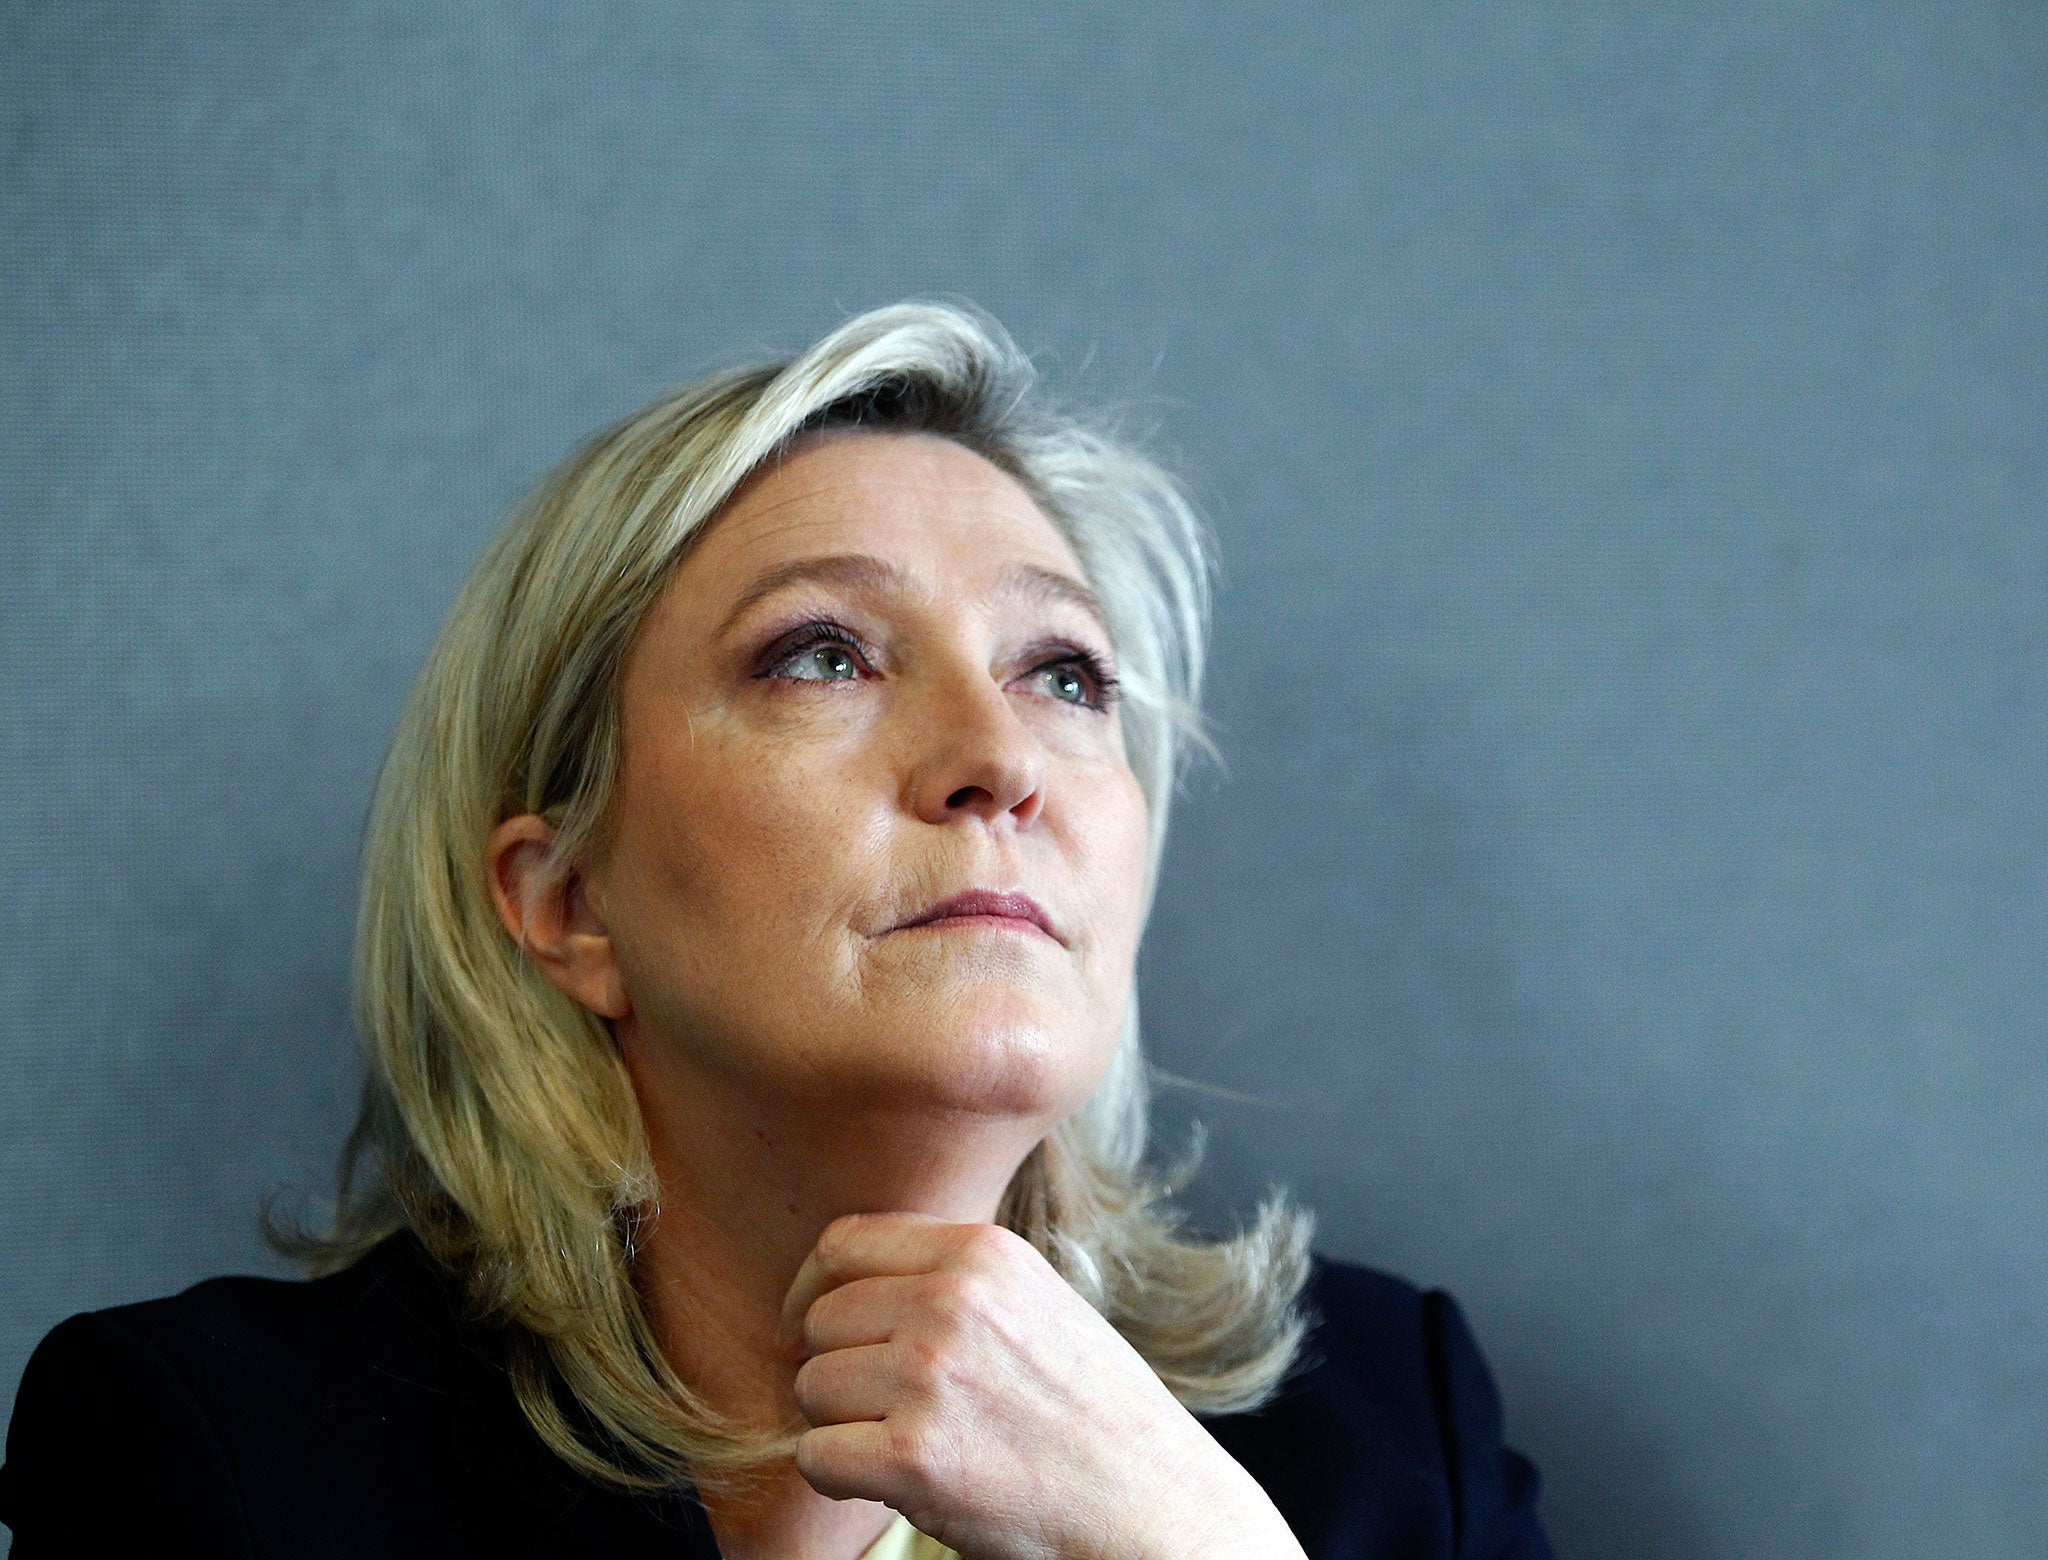 Marine Le Pen's presence in Britain would not be 'conducive to the public good', says Brexit chief